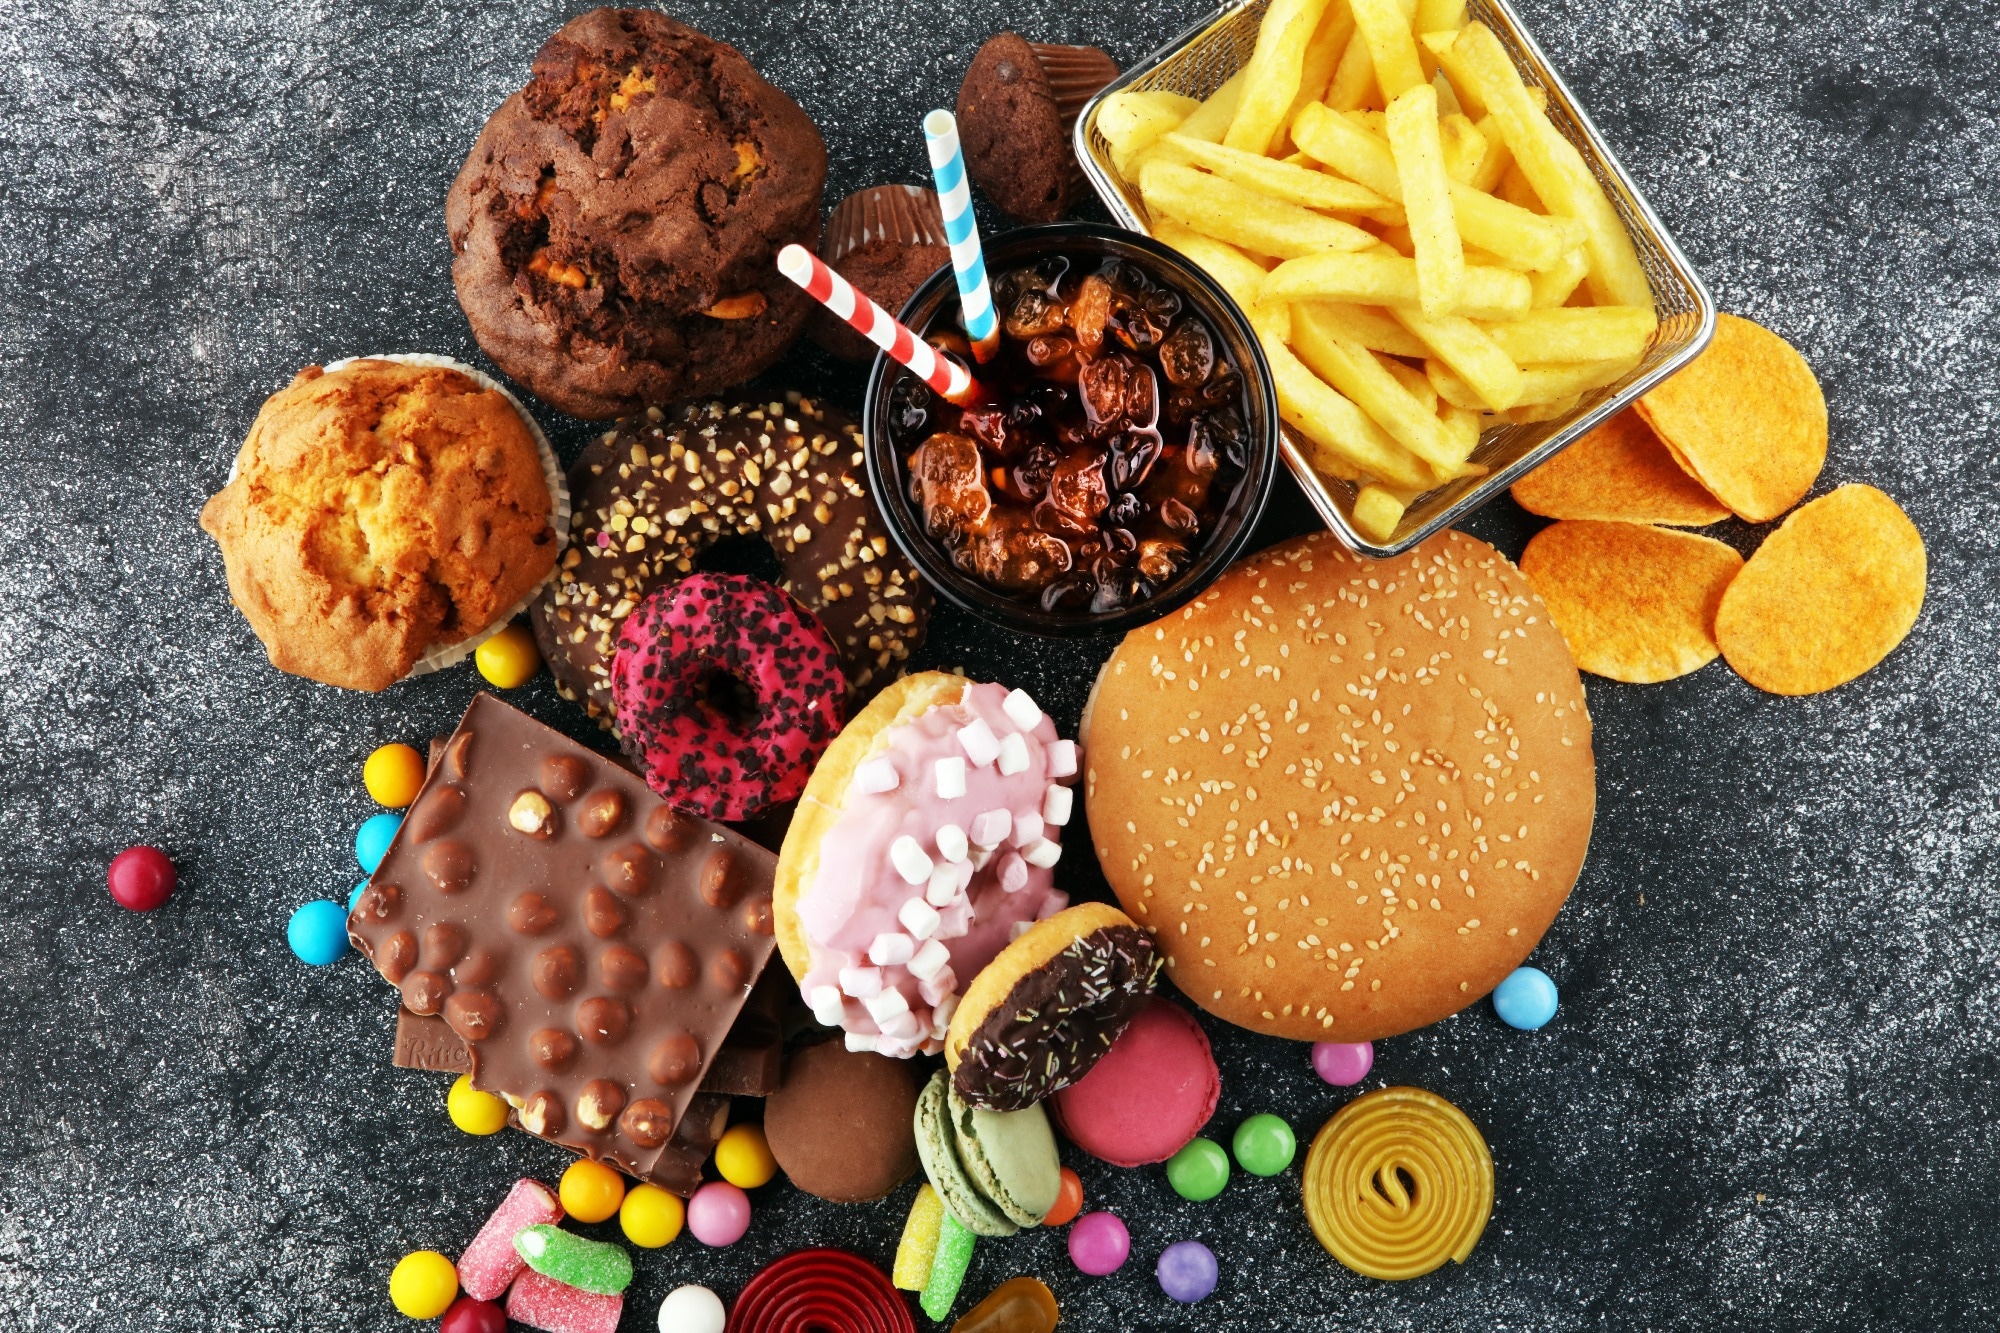 Study: A Qualitative Process Evaluation of Participant Experiences in a Feasibility Randomised Controlled Trial to Reduce Indulgent Foods and Beverages. Image Credit: beats1 / Shutterstock